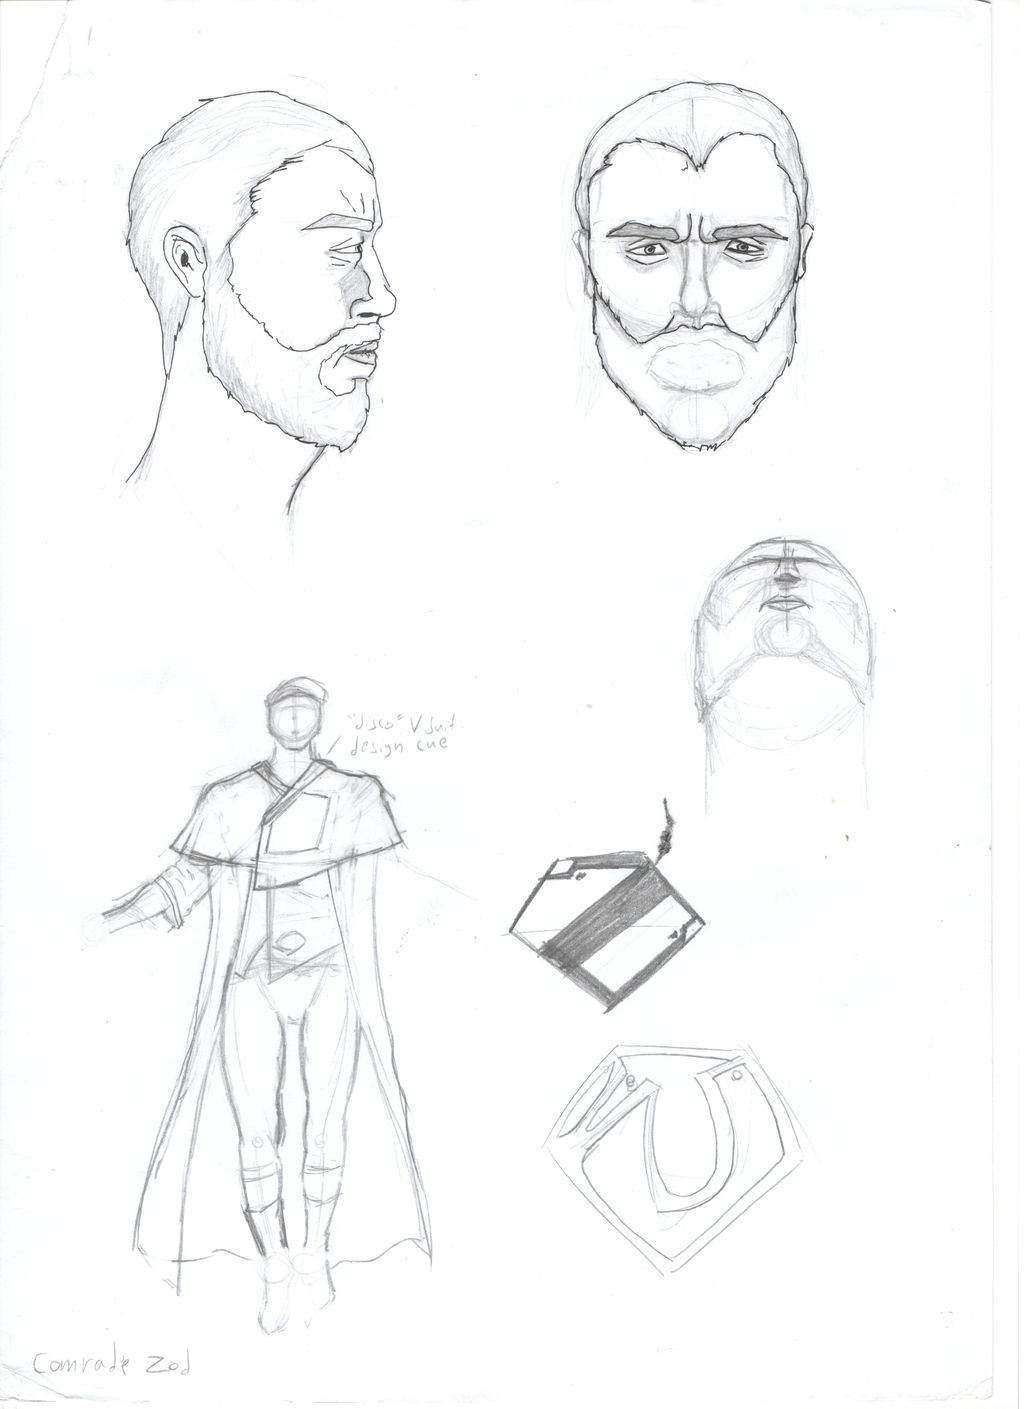 Ultimate DC: Zod Sketches